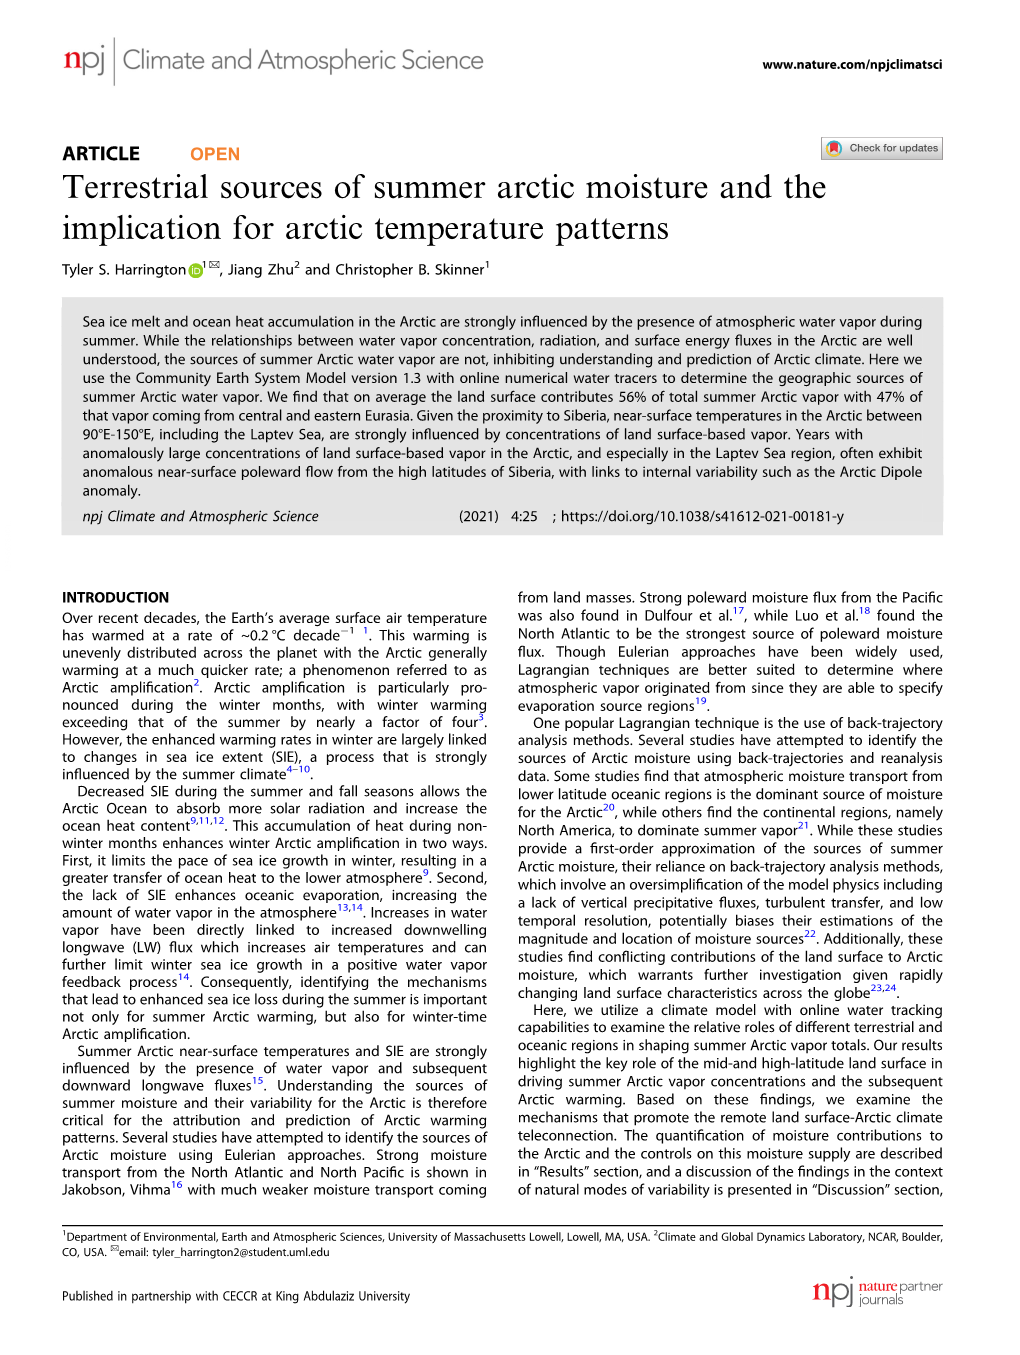 Terrestrial Sources of Summer Arctic Moisture and the Implication for Arctic Temperature Patterns ✉ Tyler S